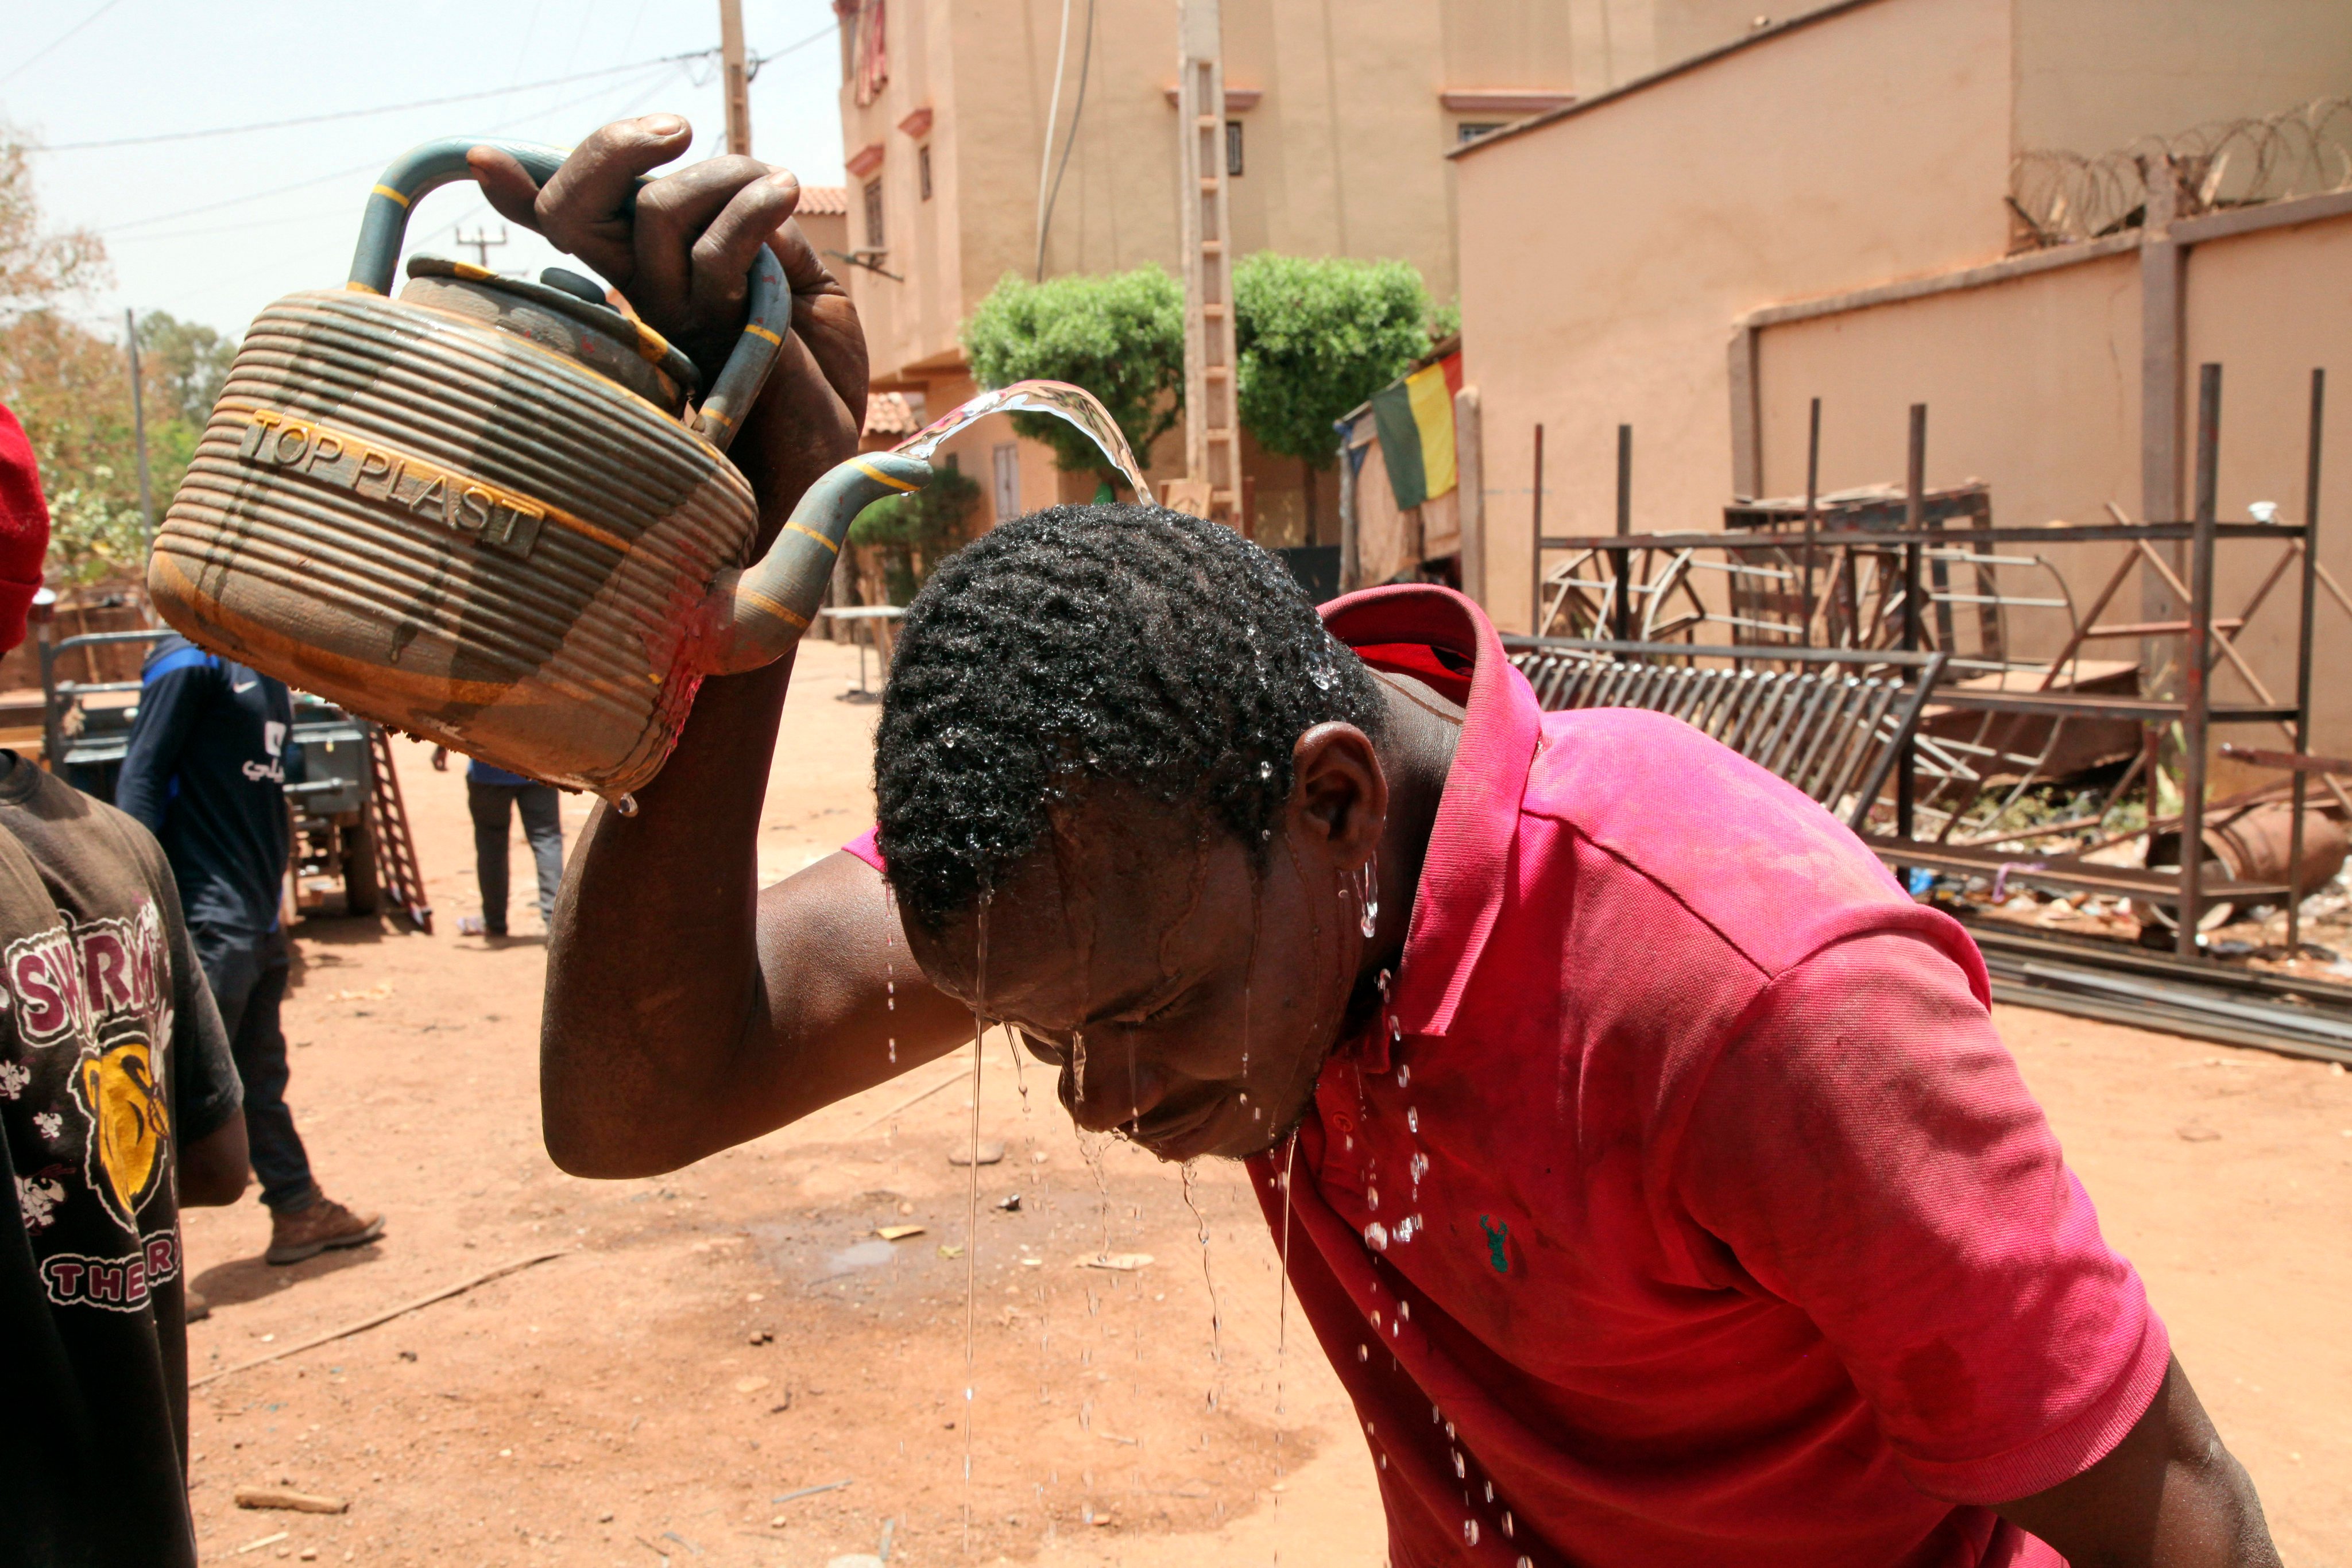 A man cools off with water under a blazing sun in Bamako, Mali, on April 18. Photo: AP